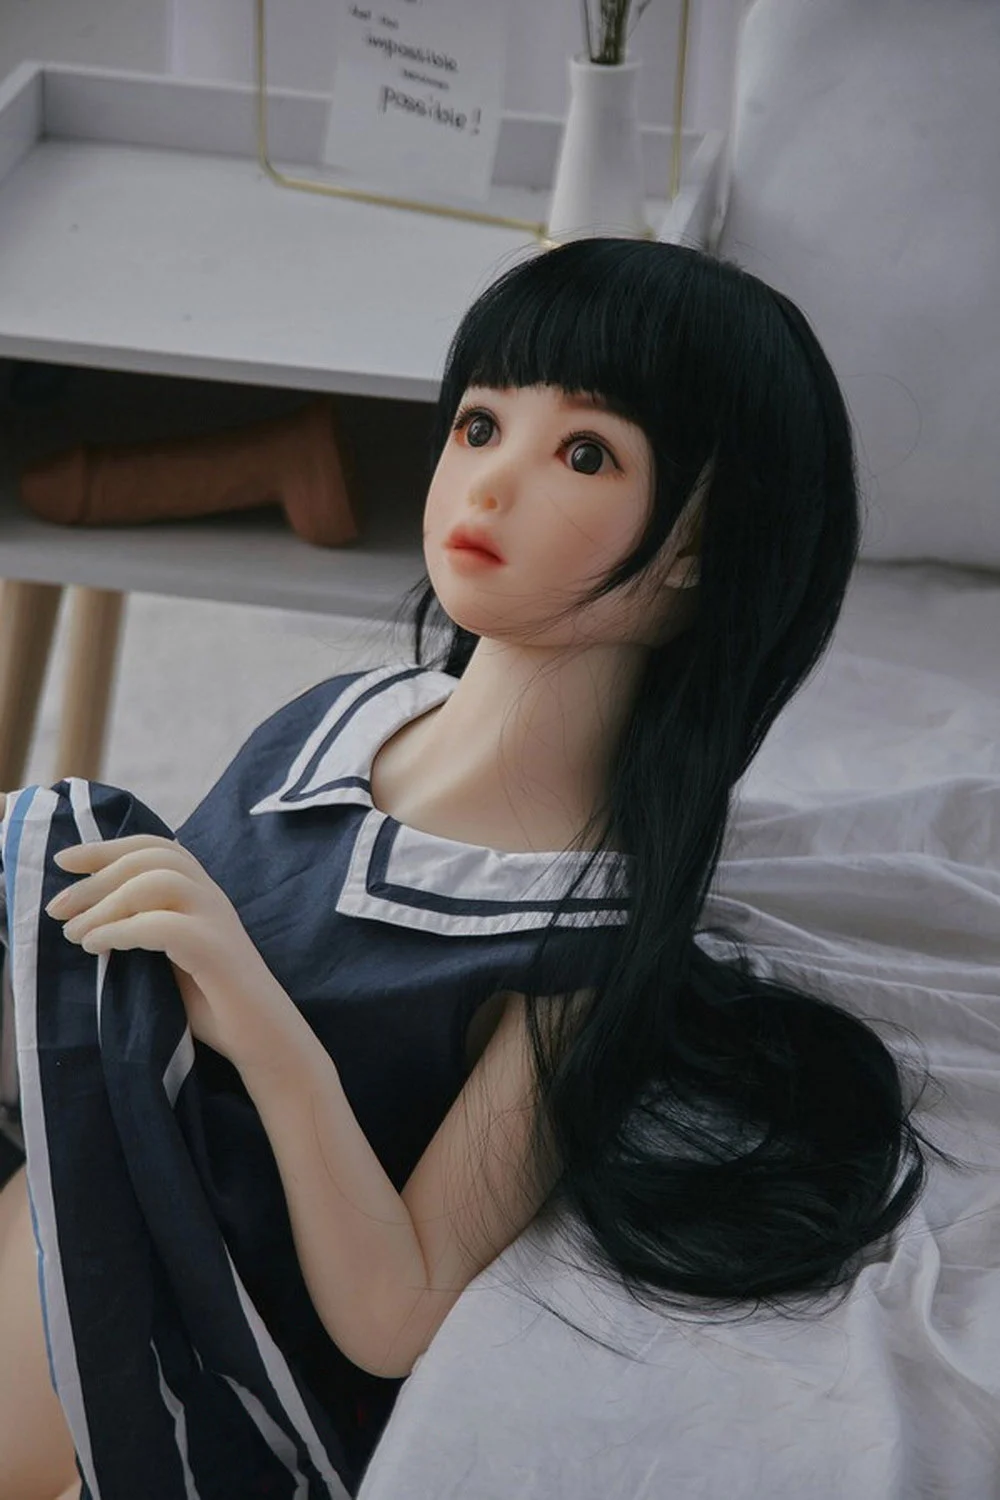 Flat chested sex doll with black long hair